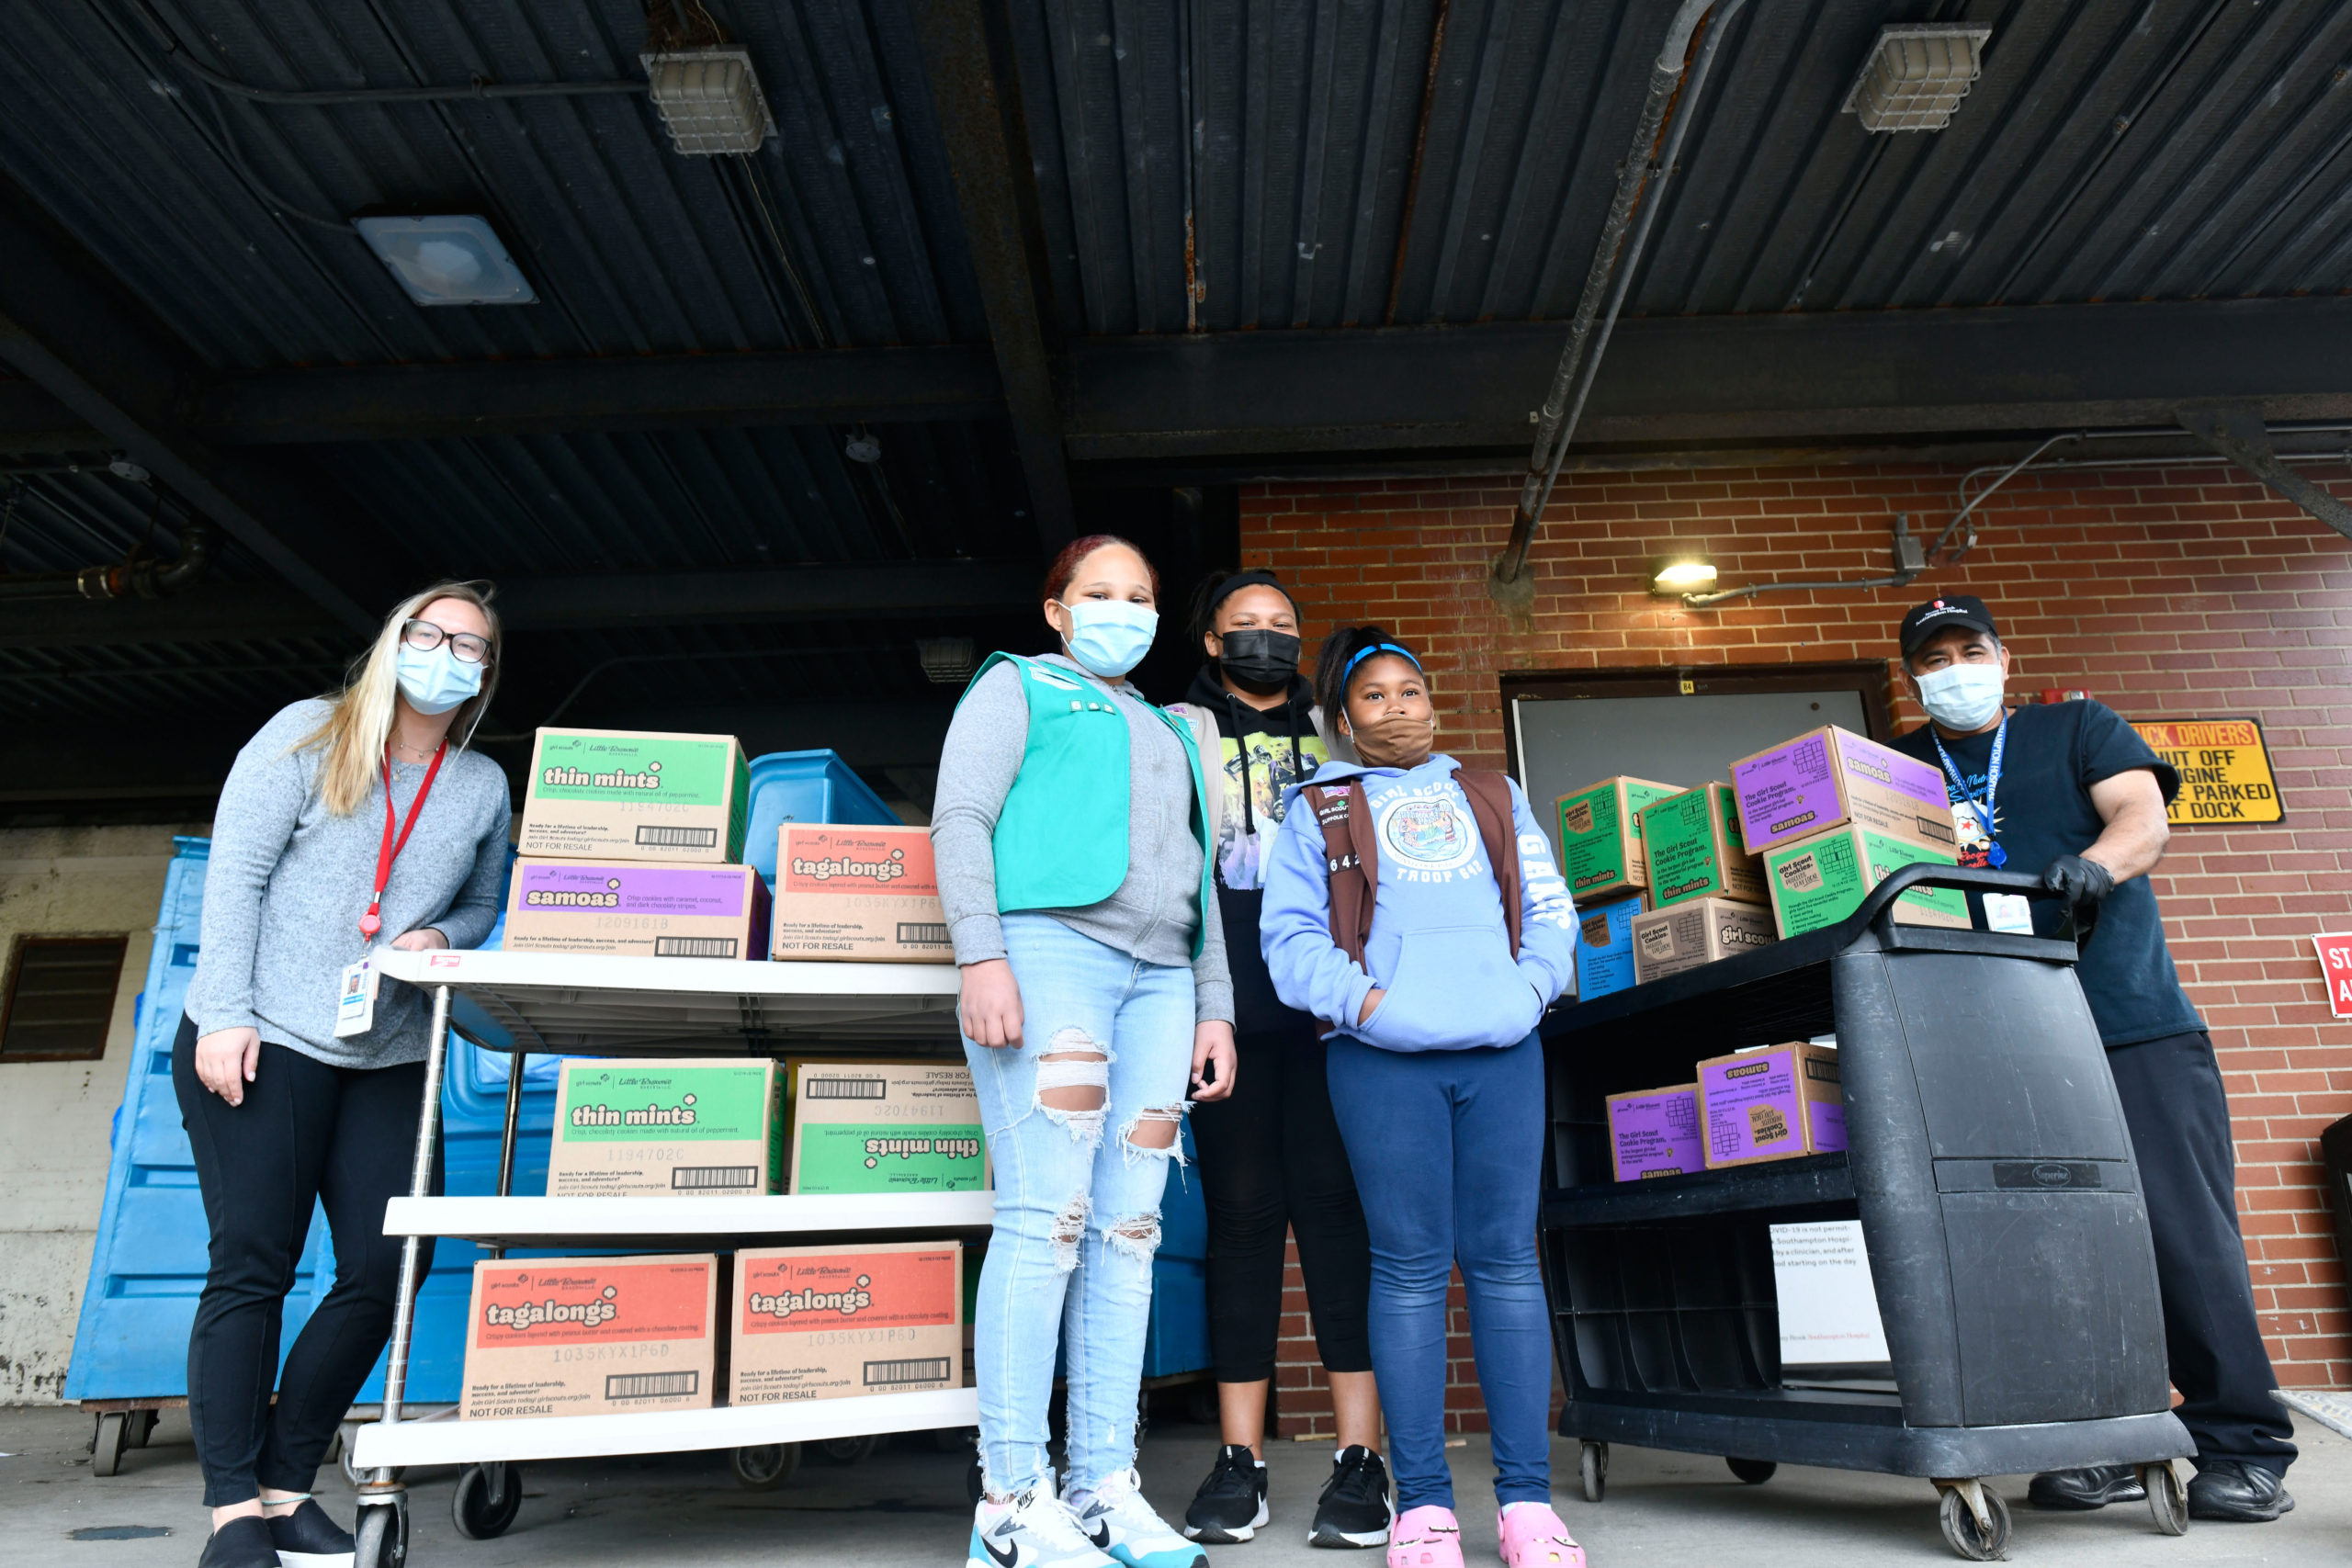 Members of Girl Scout Troop 642, Gabriella Gaines, Syvana Smith and Jordyn Smith, from the Shinnecock Nation dropped off 300 boxes (25 cases) of Girls Scout Cookies for the employees at Stony Brook Southampton Hospital on Sunday. May 2. Helping the girls unload are hospital employees Victoria Stanek and Cesar Flores.  DANA SHAW